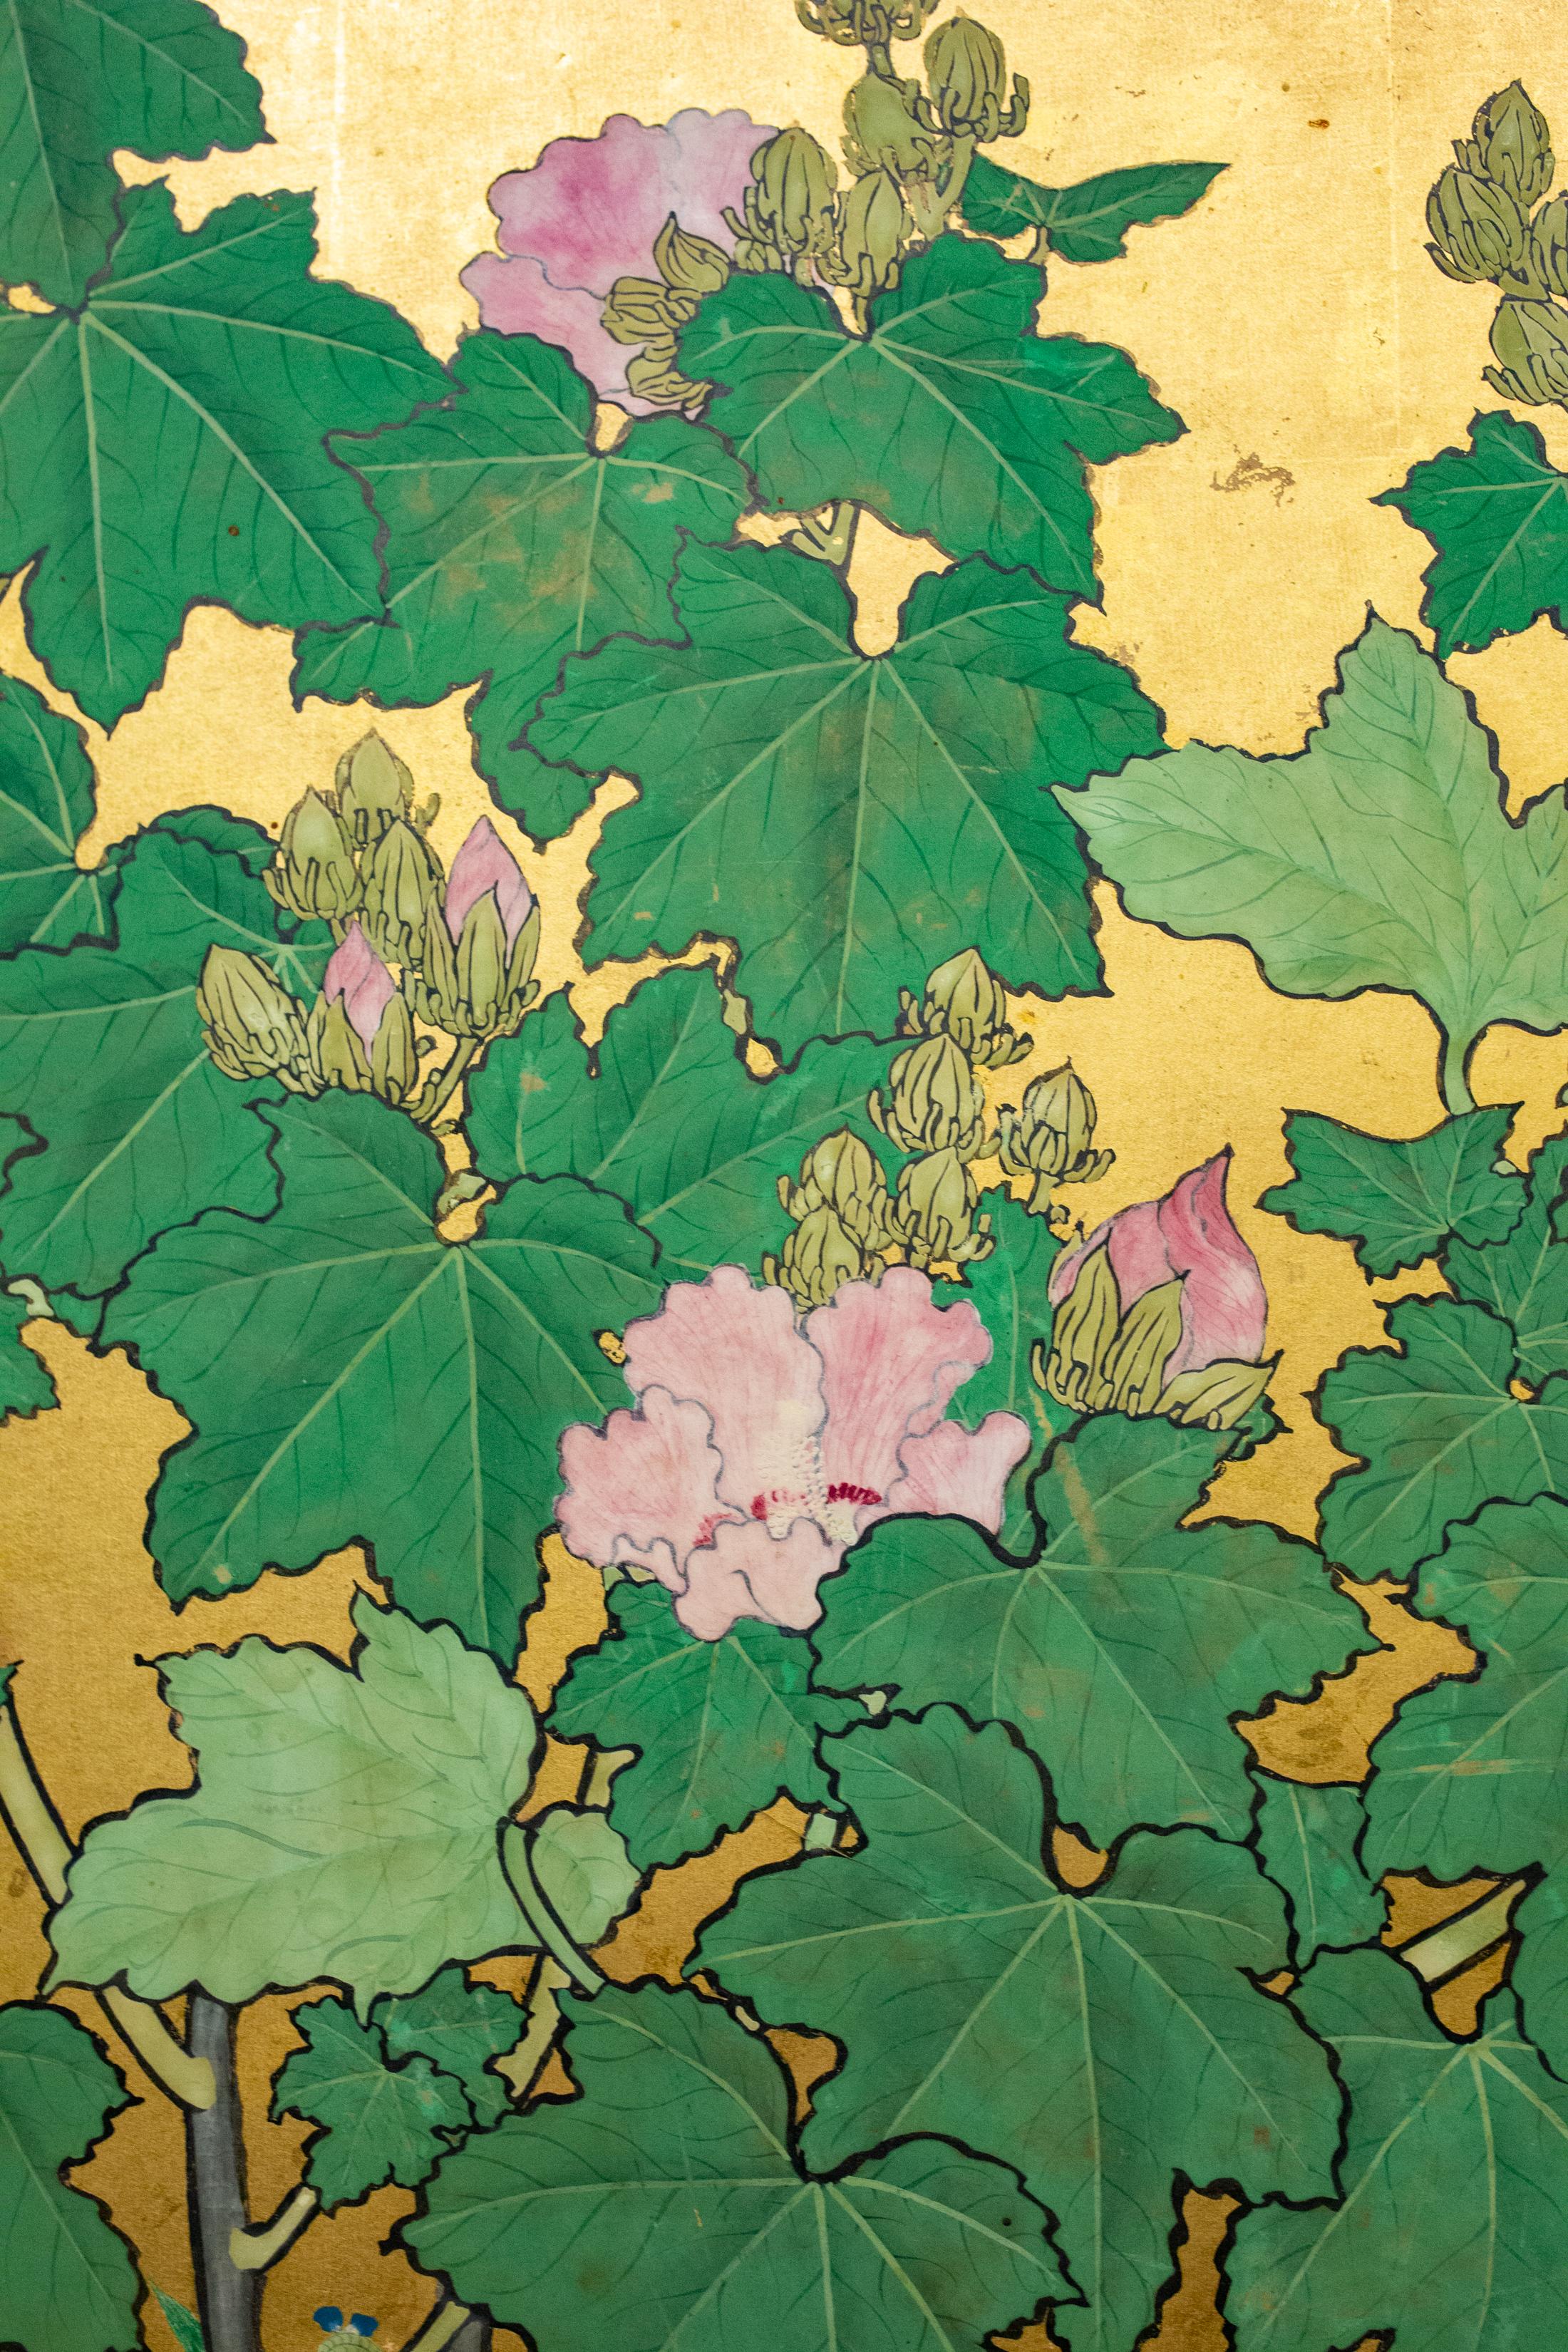 Edo period (early 19th century) of white and pink hollyhocks in bloom. This flower is often referenced in Japanese culture, most notably the hollyhock makes up the family crest of the Tokugawa clan, the last shogunate of Japan. Signature reads: